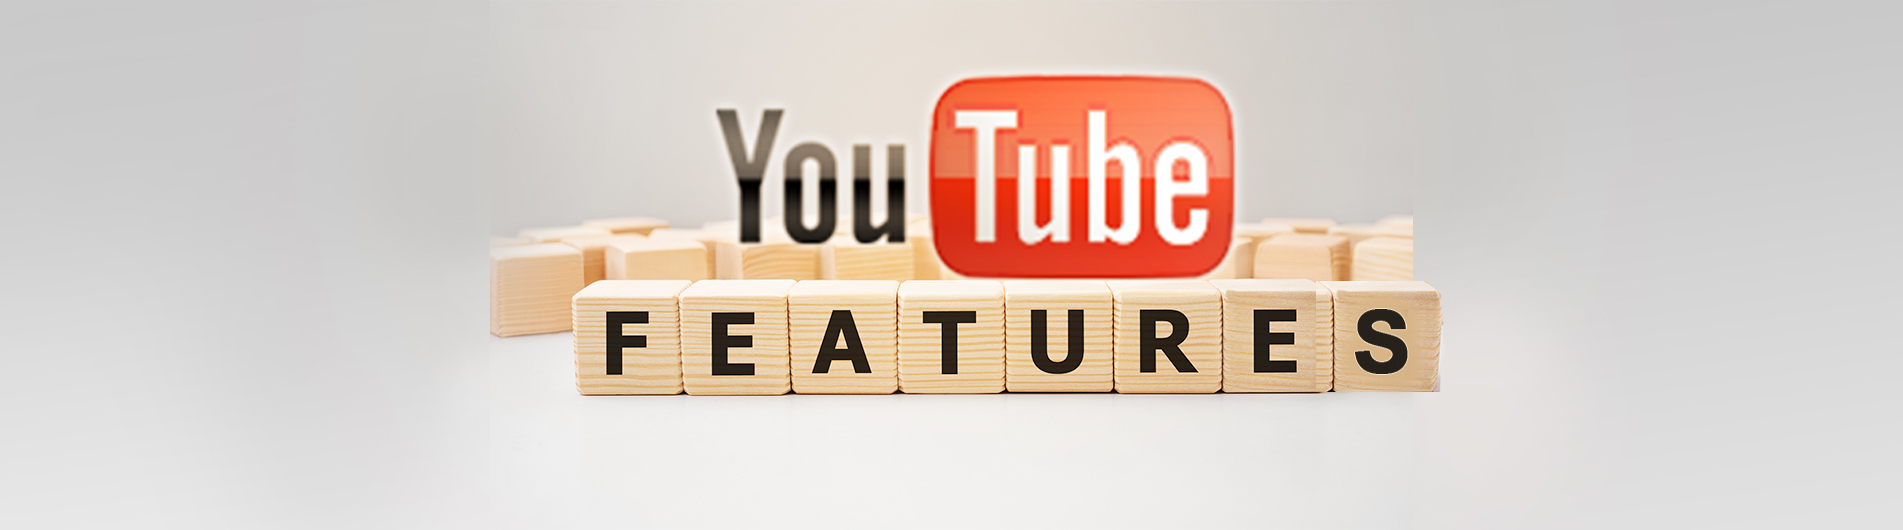 Youtube Features